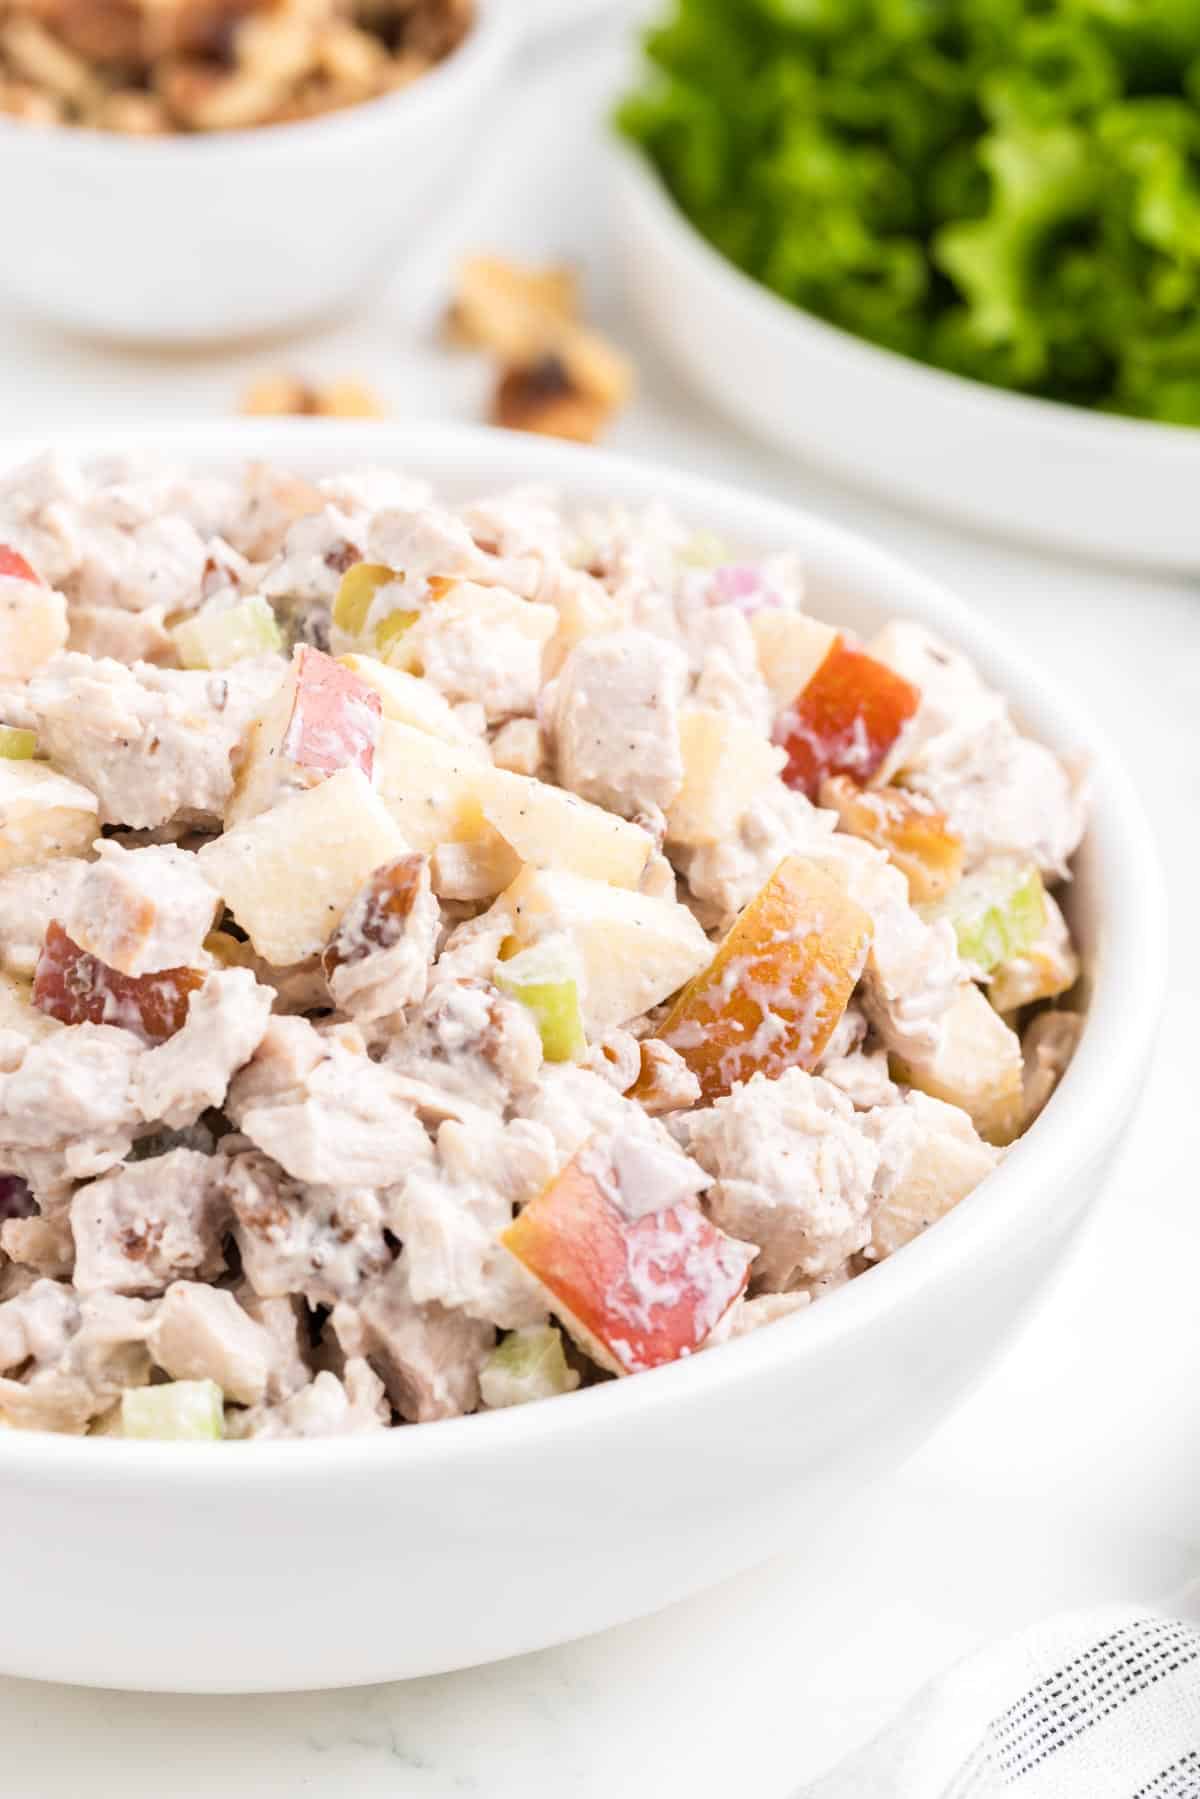 Apple Walnut Chicken Salad is a tasty lunch or dinner recipe using diced chicken, apples, chopped walnuts, celery and red onions all coated in a creamy mayo and sour cream based dressing.